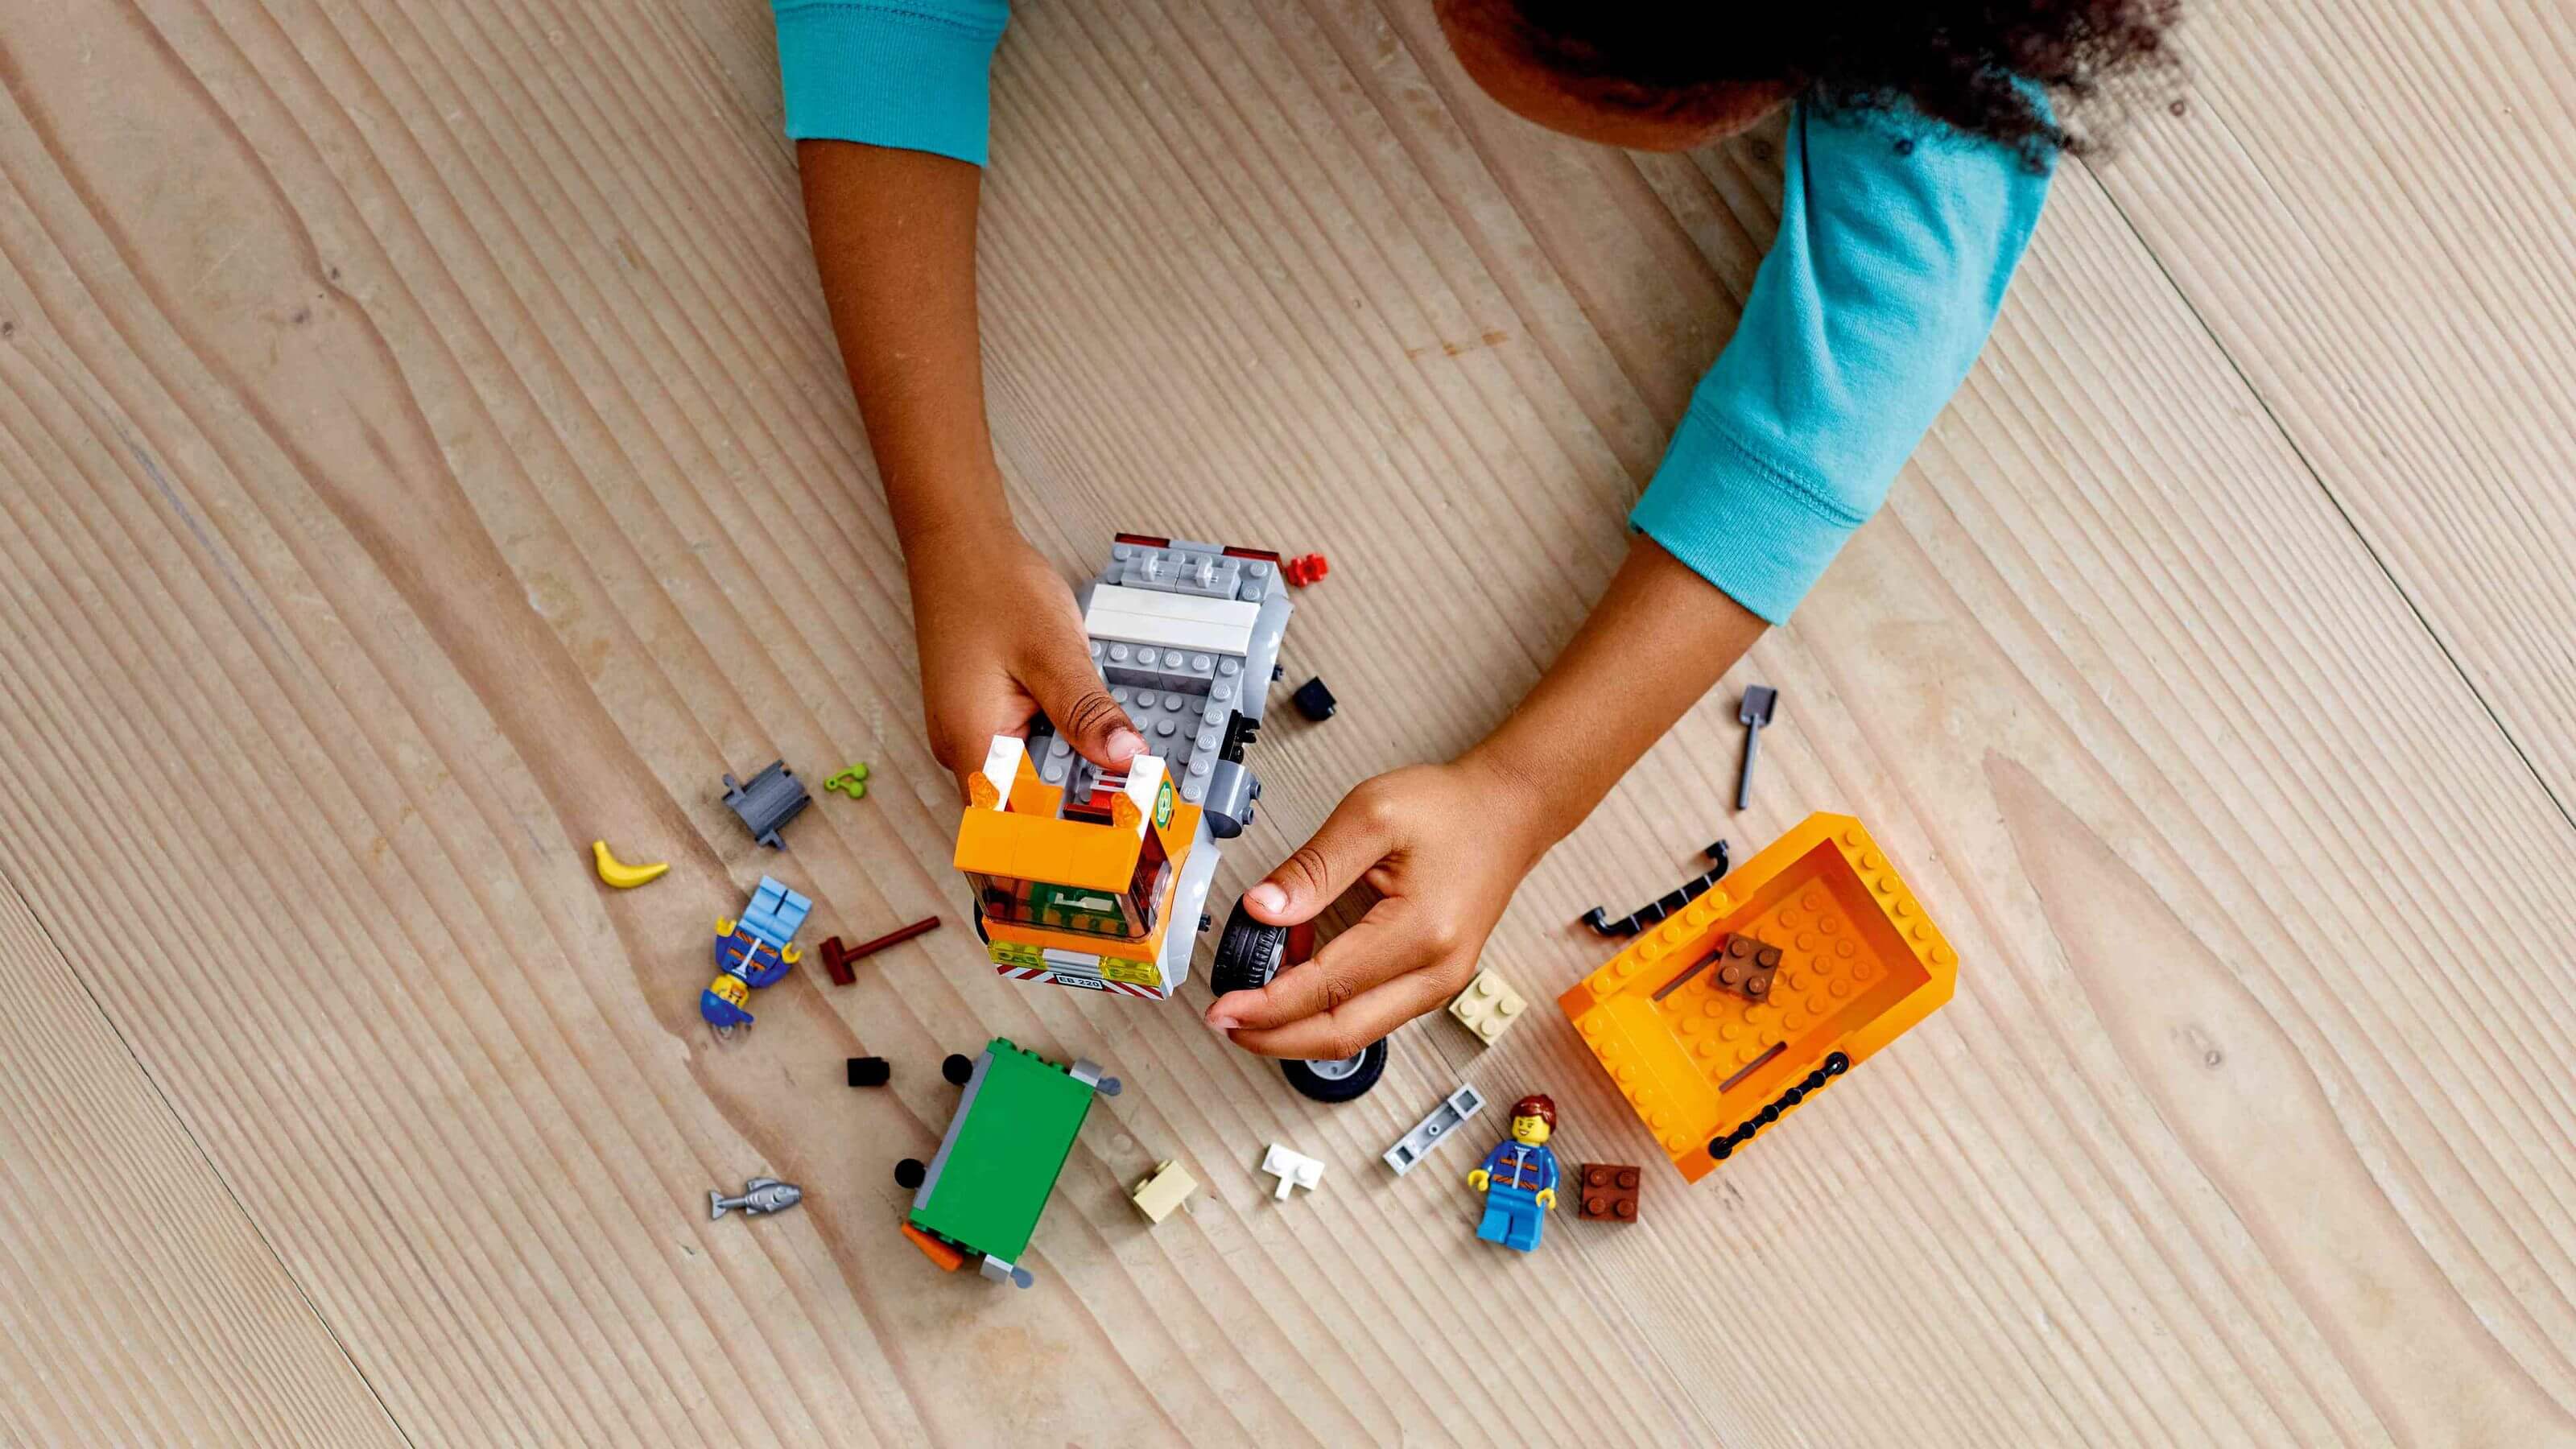 Kid playing with Legos on Floor